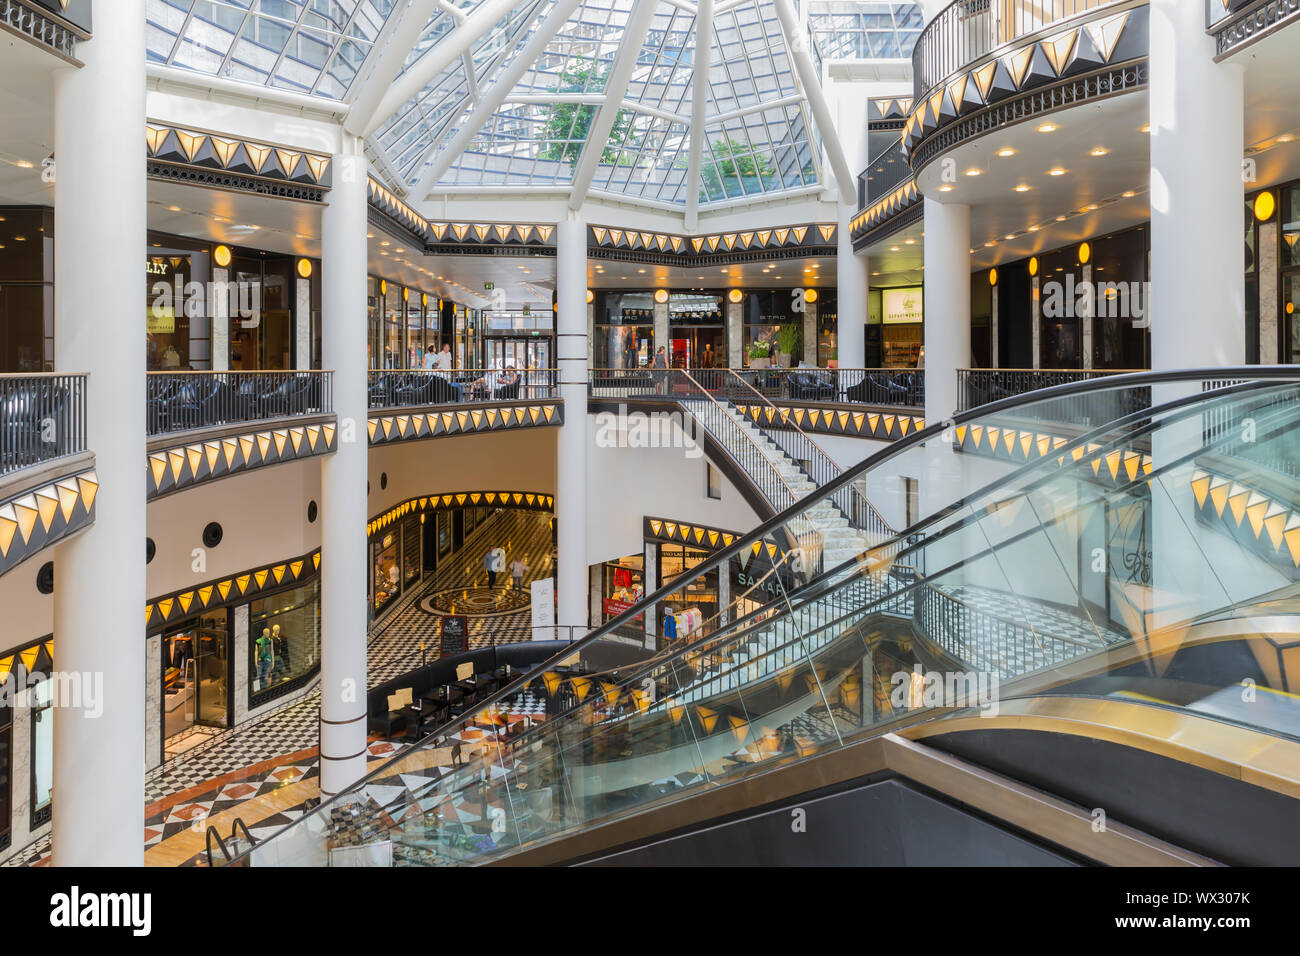 Luxurious art deco style shopping mall in Berlin, Germany Stock Photo